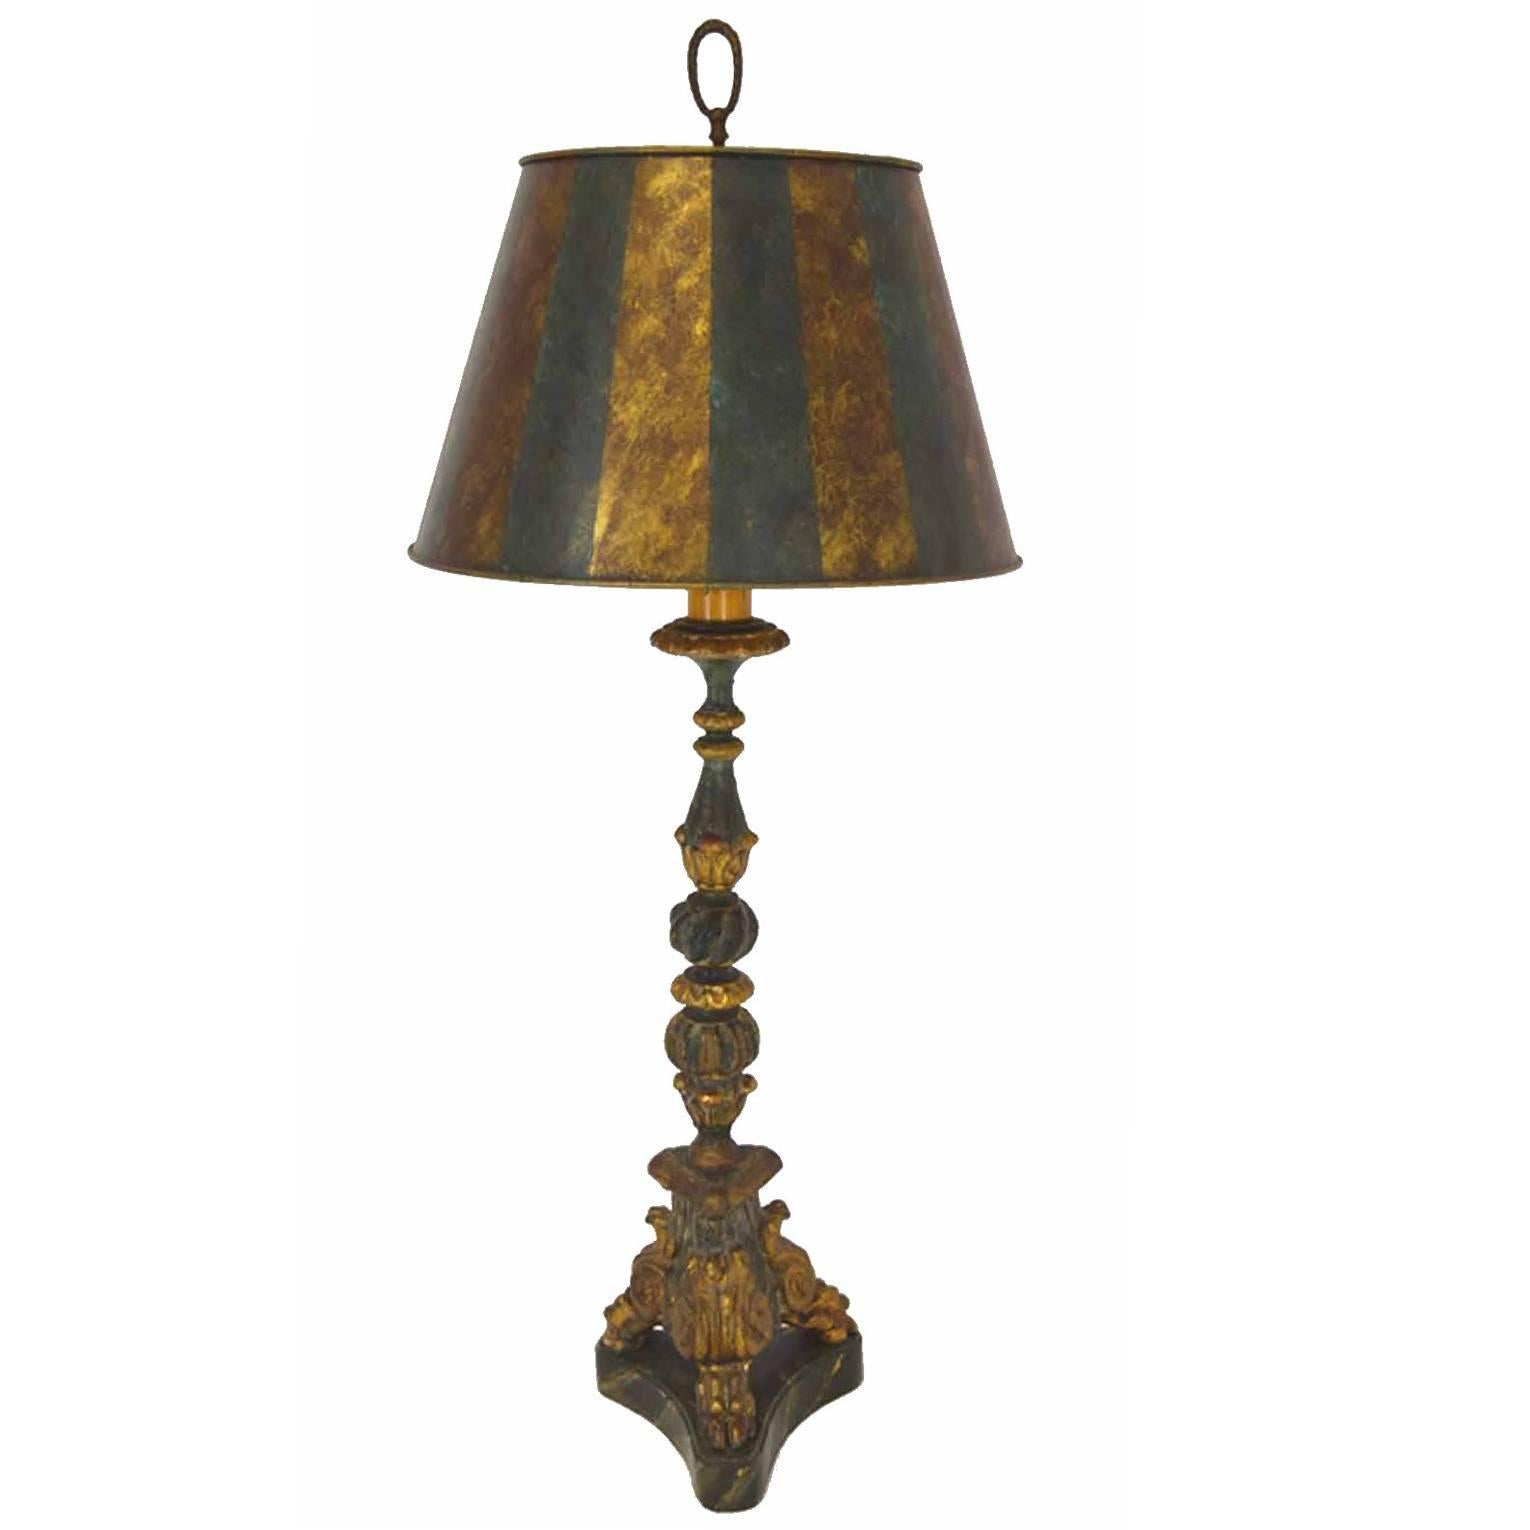 Superb Antique Italian Baroque Hand-Carved Faux Candlestick Lamp, circa 1720 For Sale